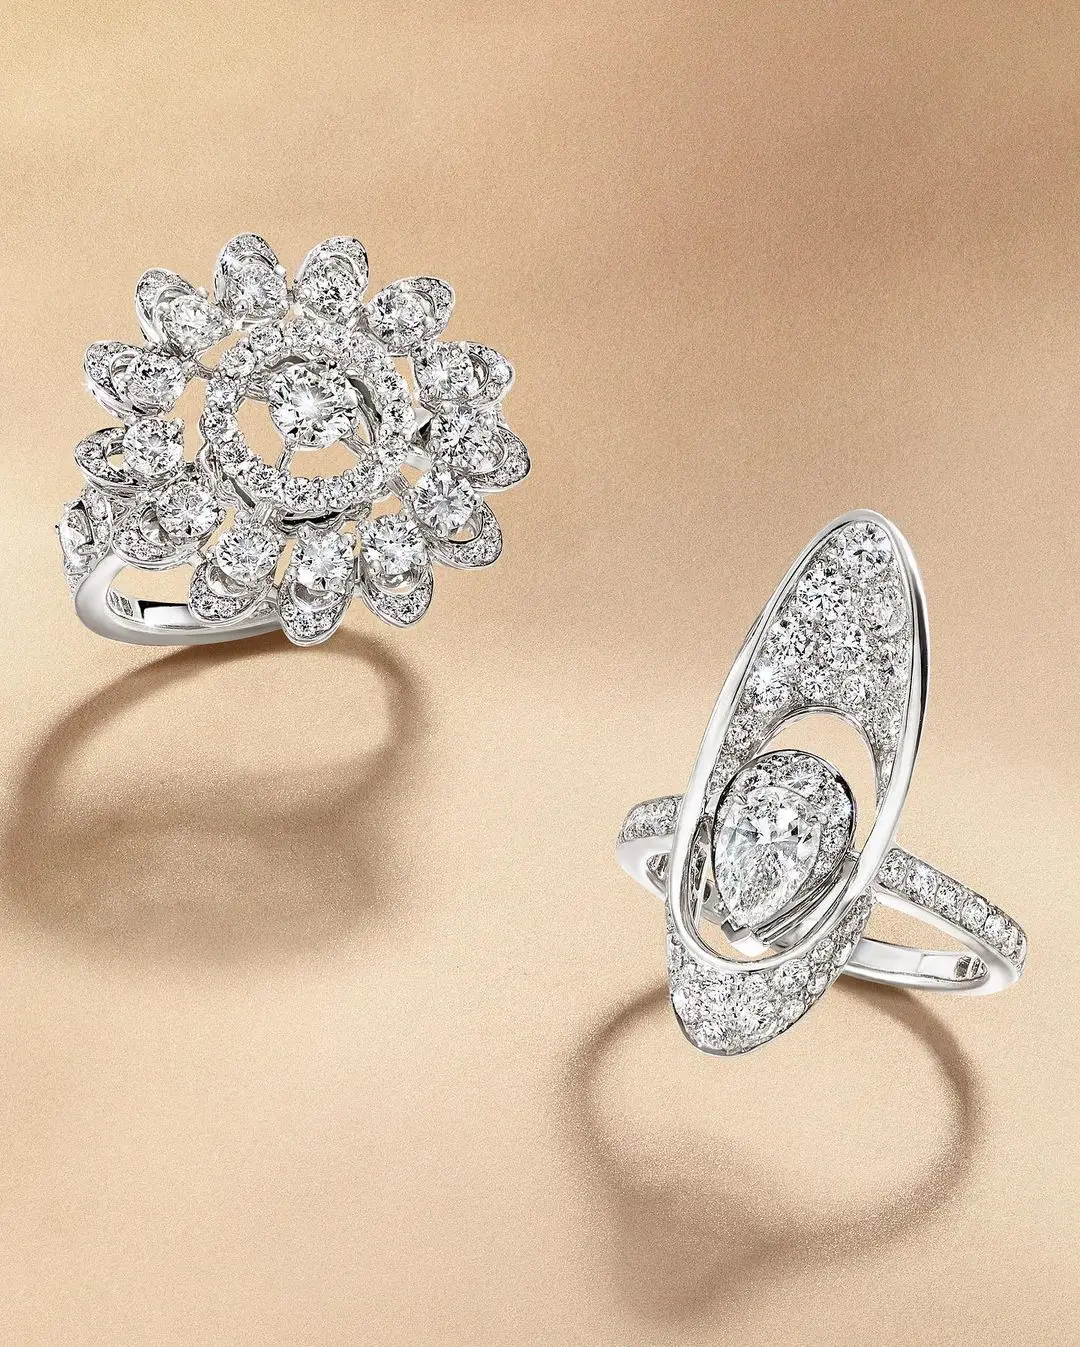 Best Metals for Engagement and Wedding Rings ...